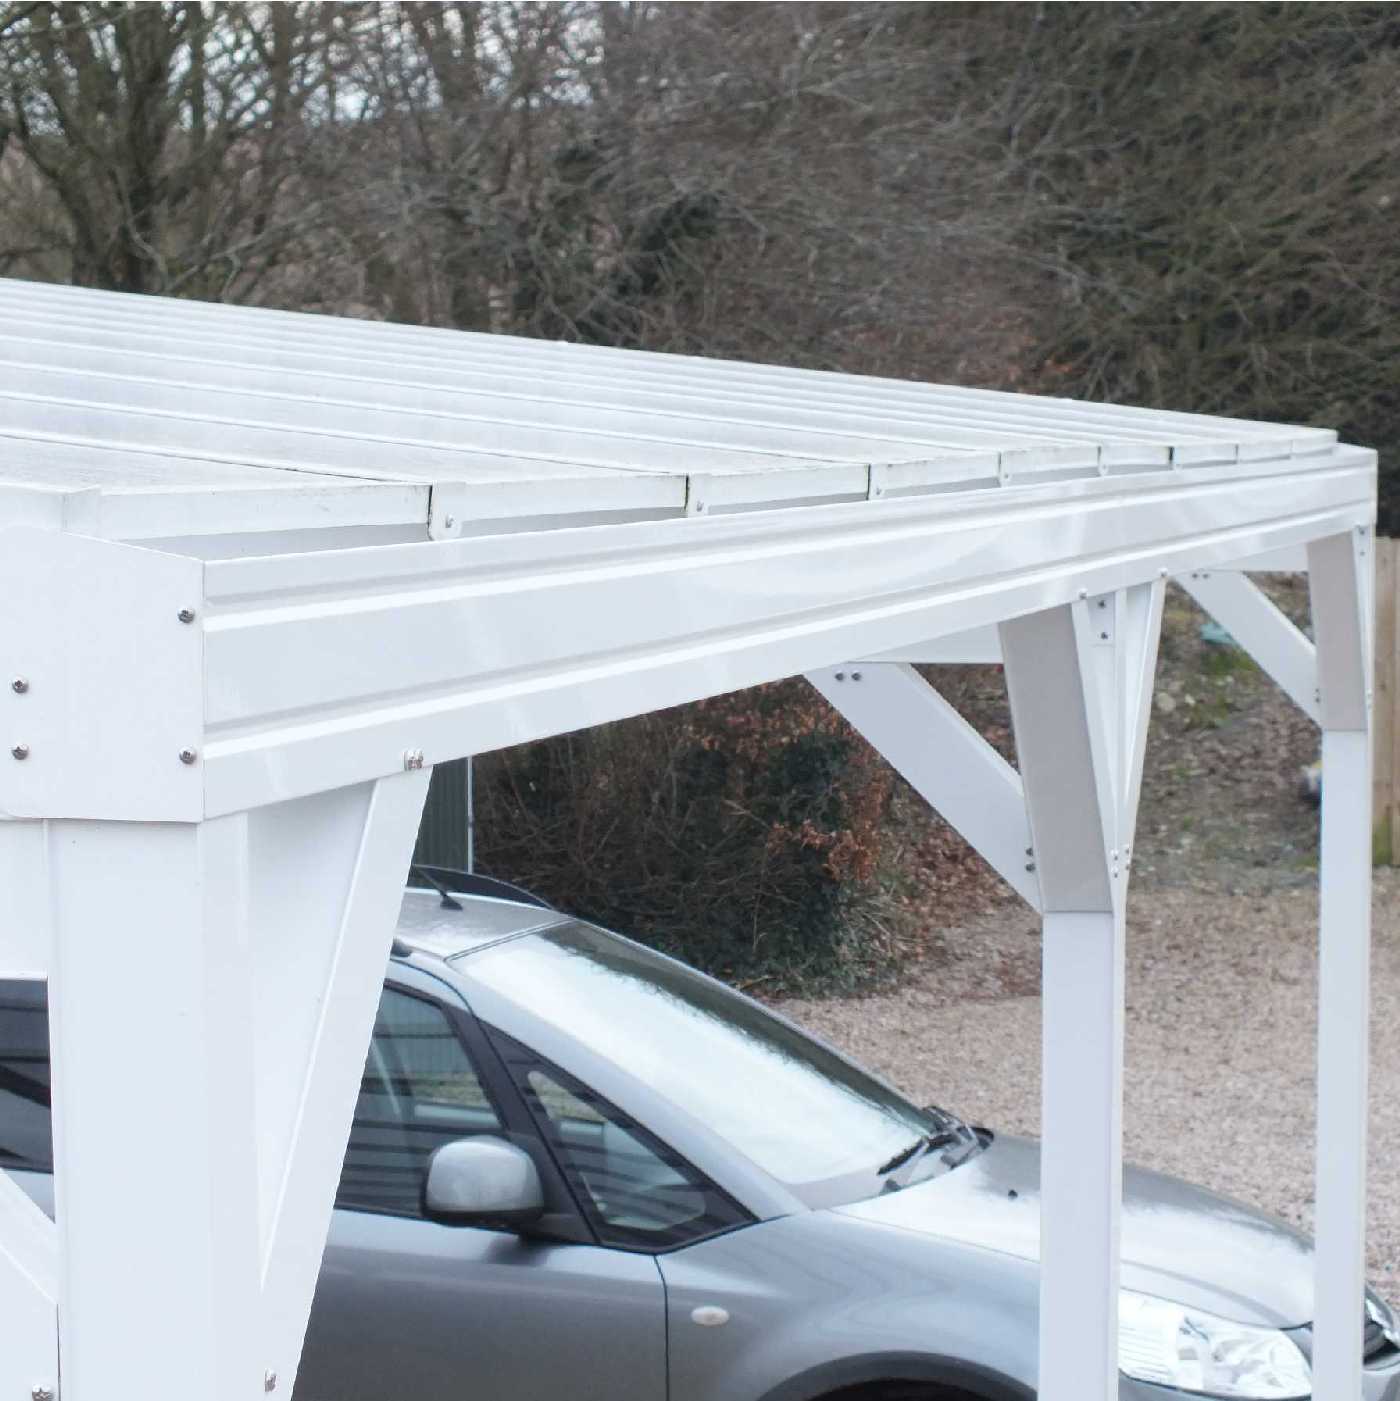 Omega Smart Free-Standing, White MonoPitch Roof Canopy with 6mm Glass Clear Plate Polycarbonate Glazing - 3.5m (W) x 3.0m (P), (6) Supporting Posts from Omega Build